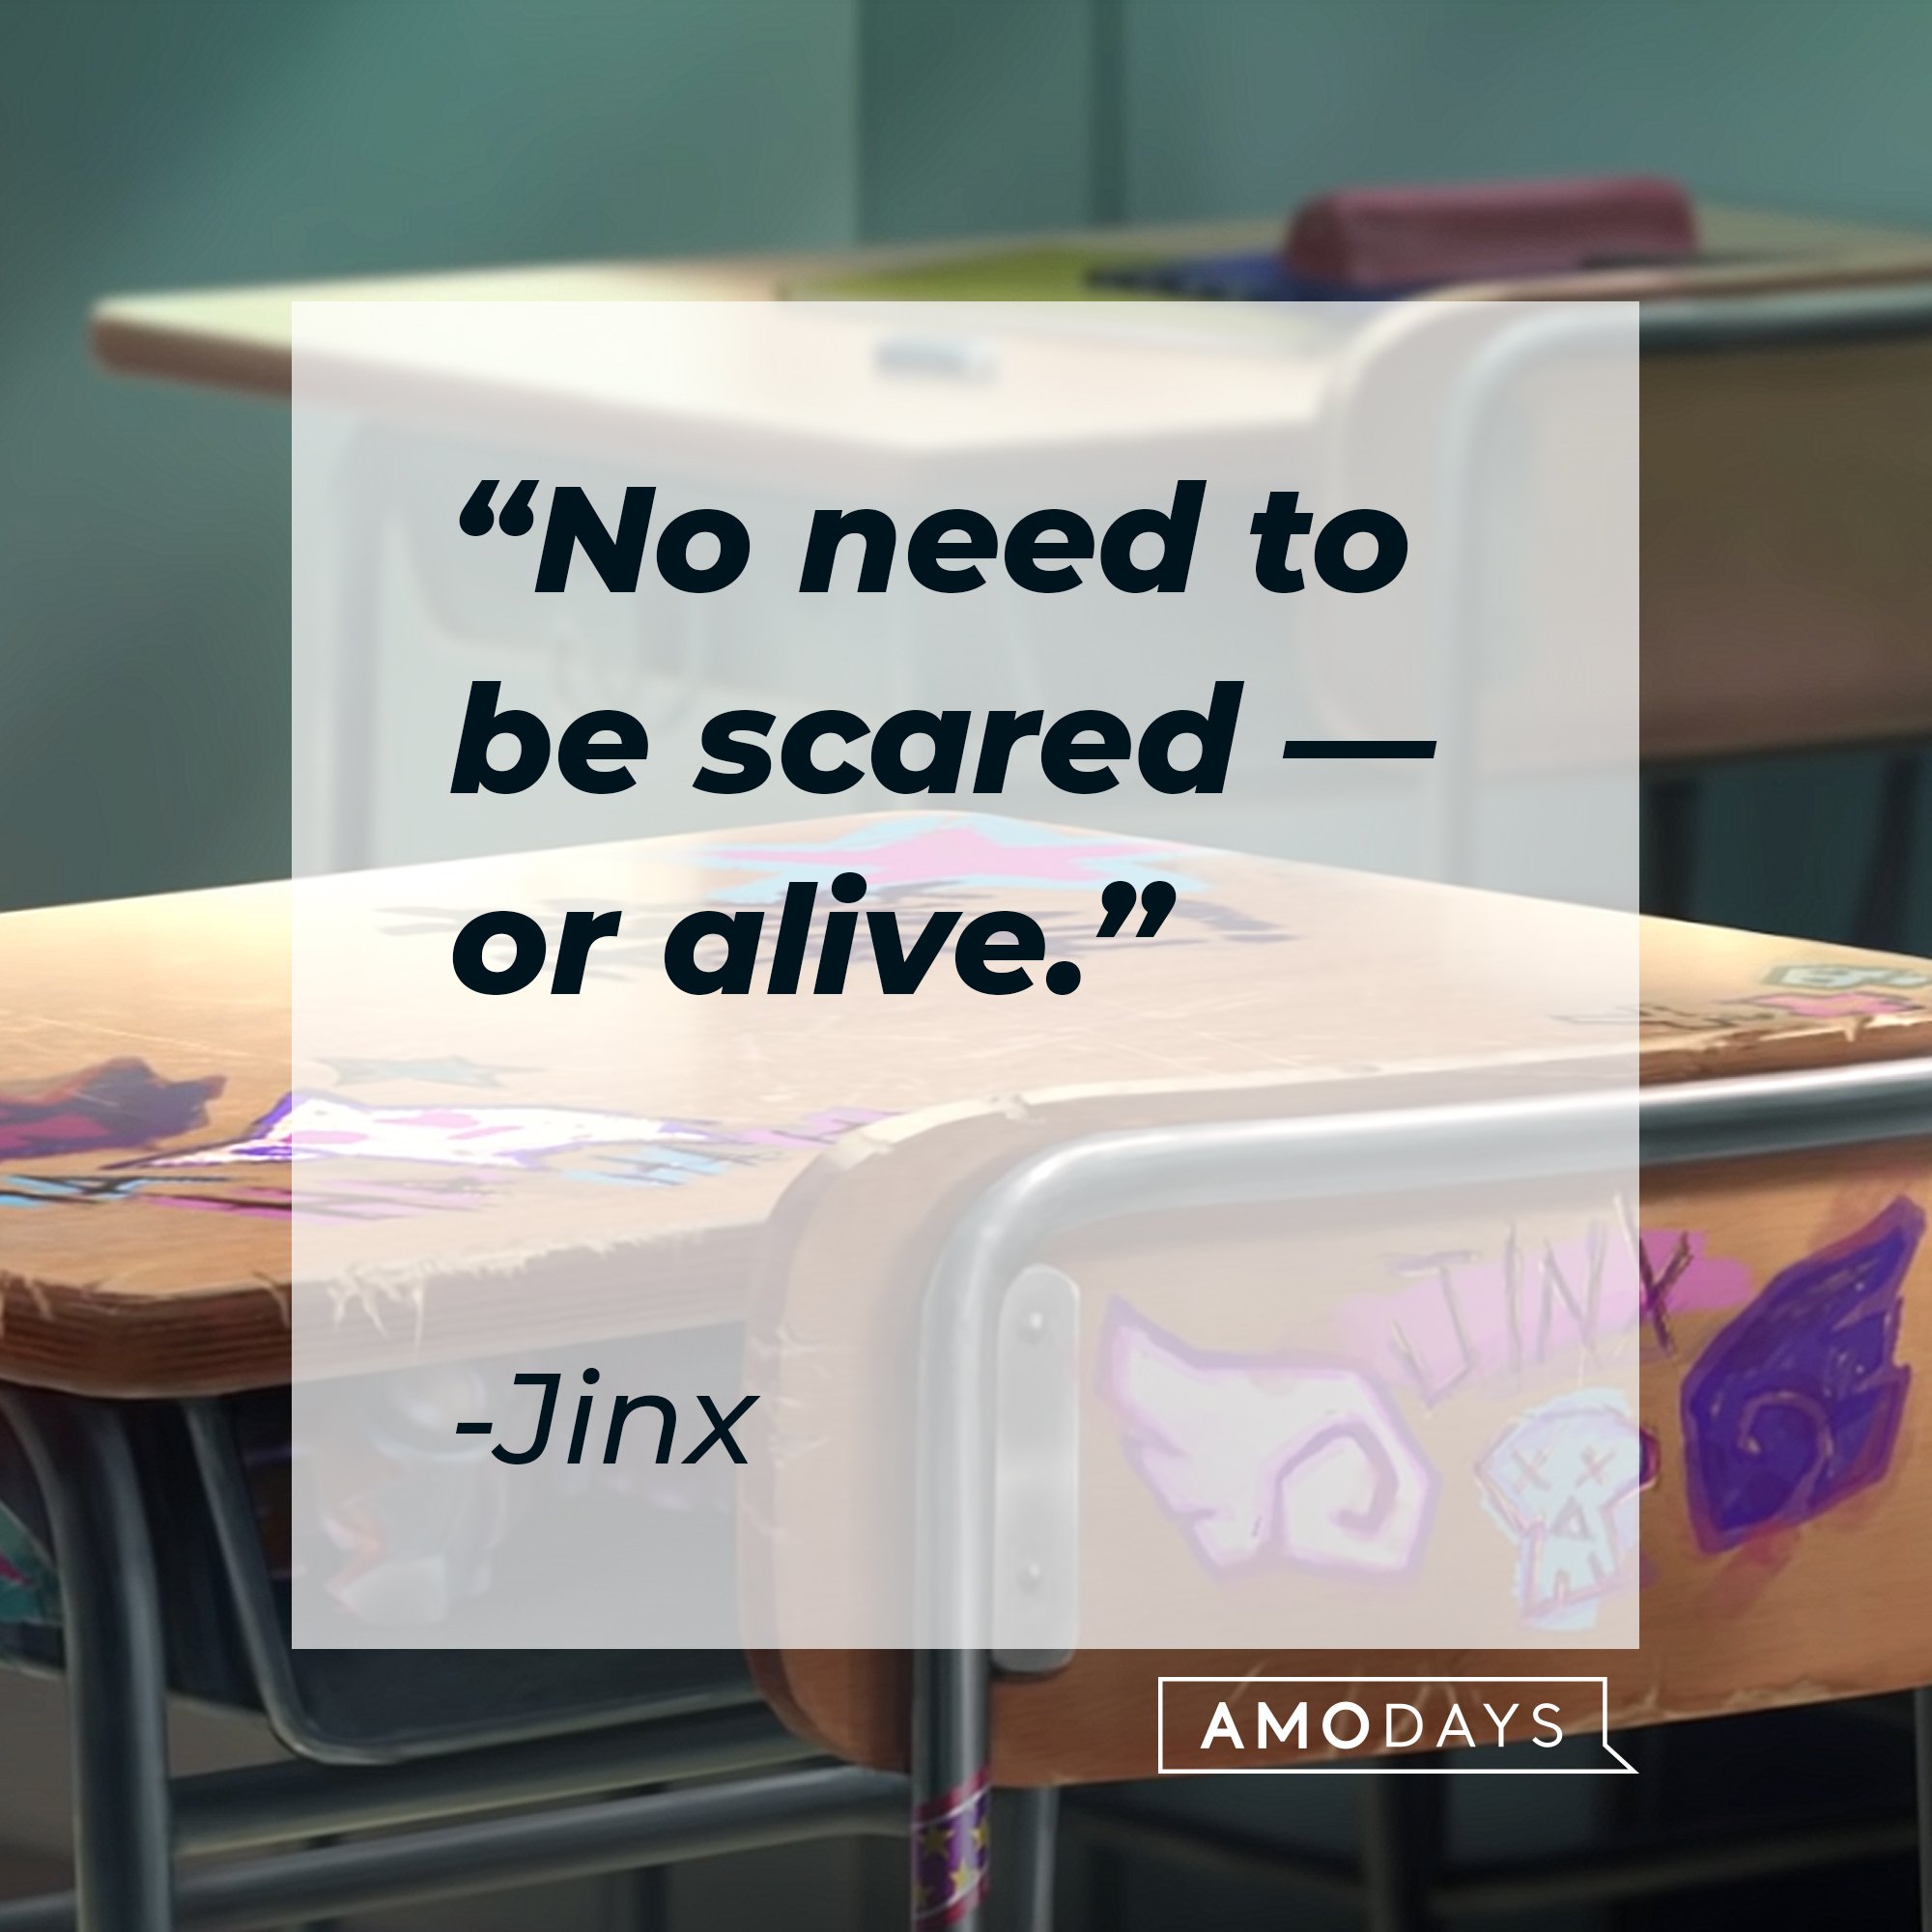 Jinx's quote: "No need to be scared — or alive." | Image: AmoDays